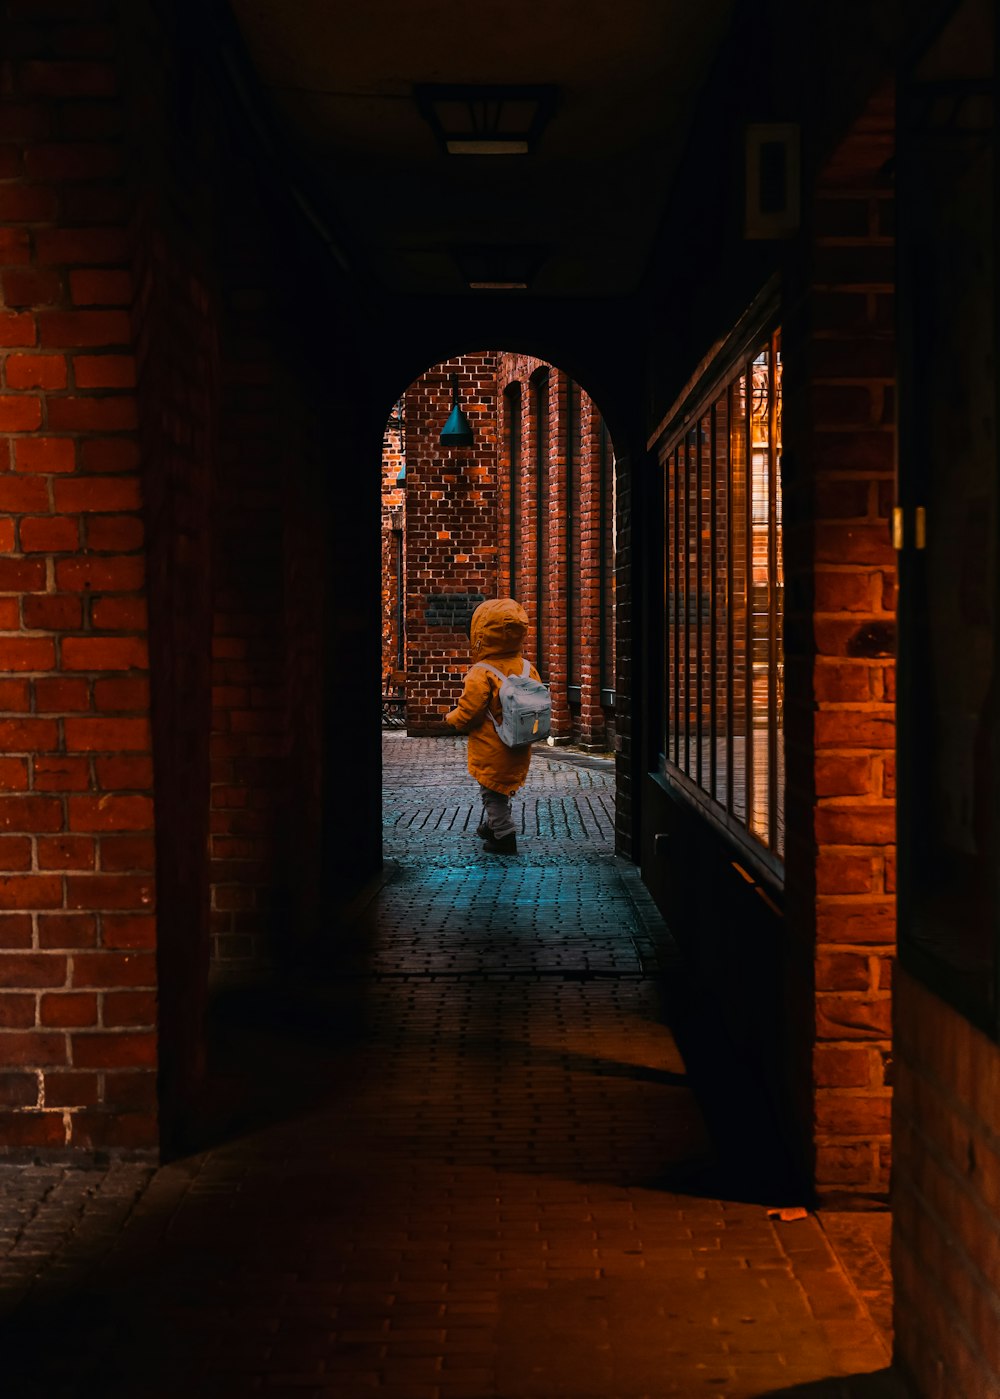 a teddy bear sitting in the middle of a hallway